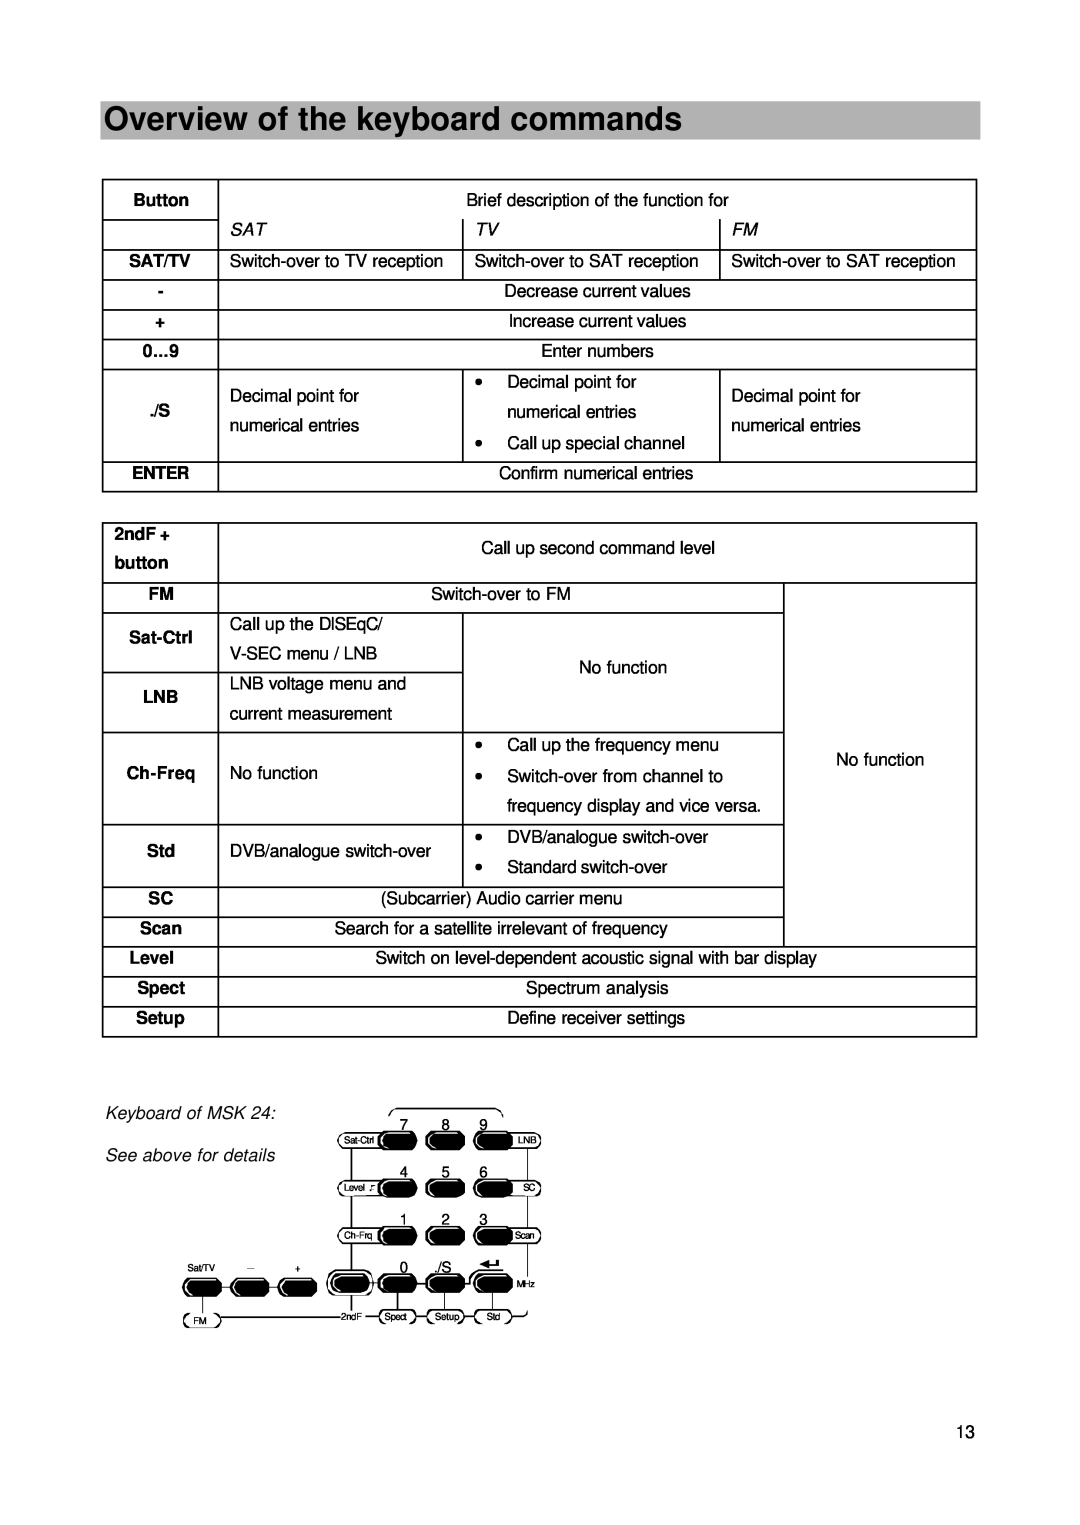 Kathrein MSK 24 manual Overview of the keyboard commands, 0...9, Enter, 2ndF +, button, Sat-Ctrl, Ch-Freq, Button 